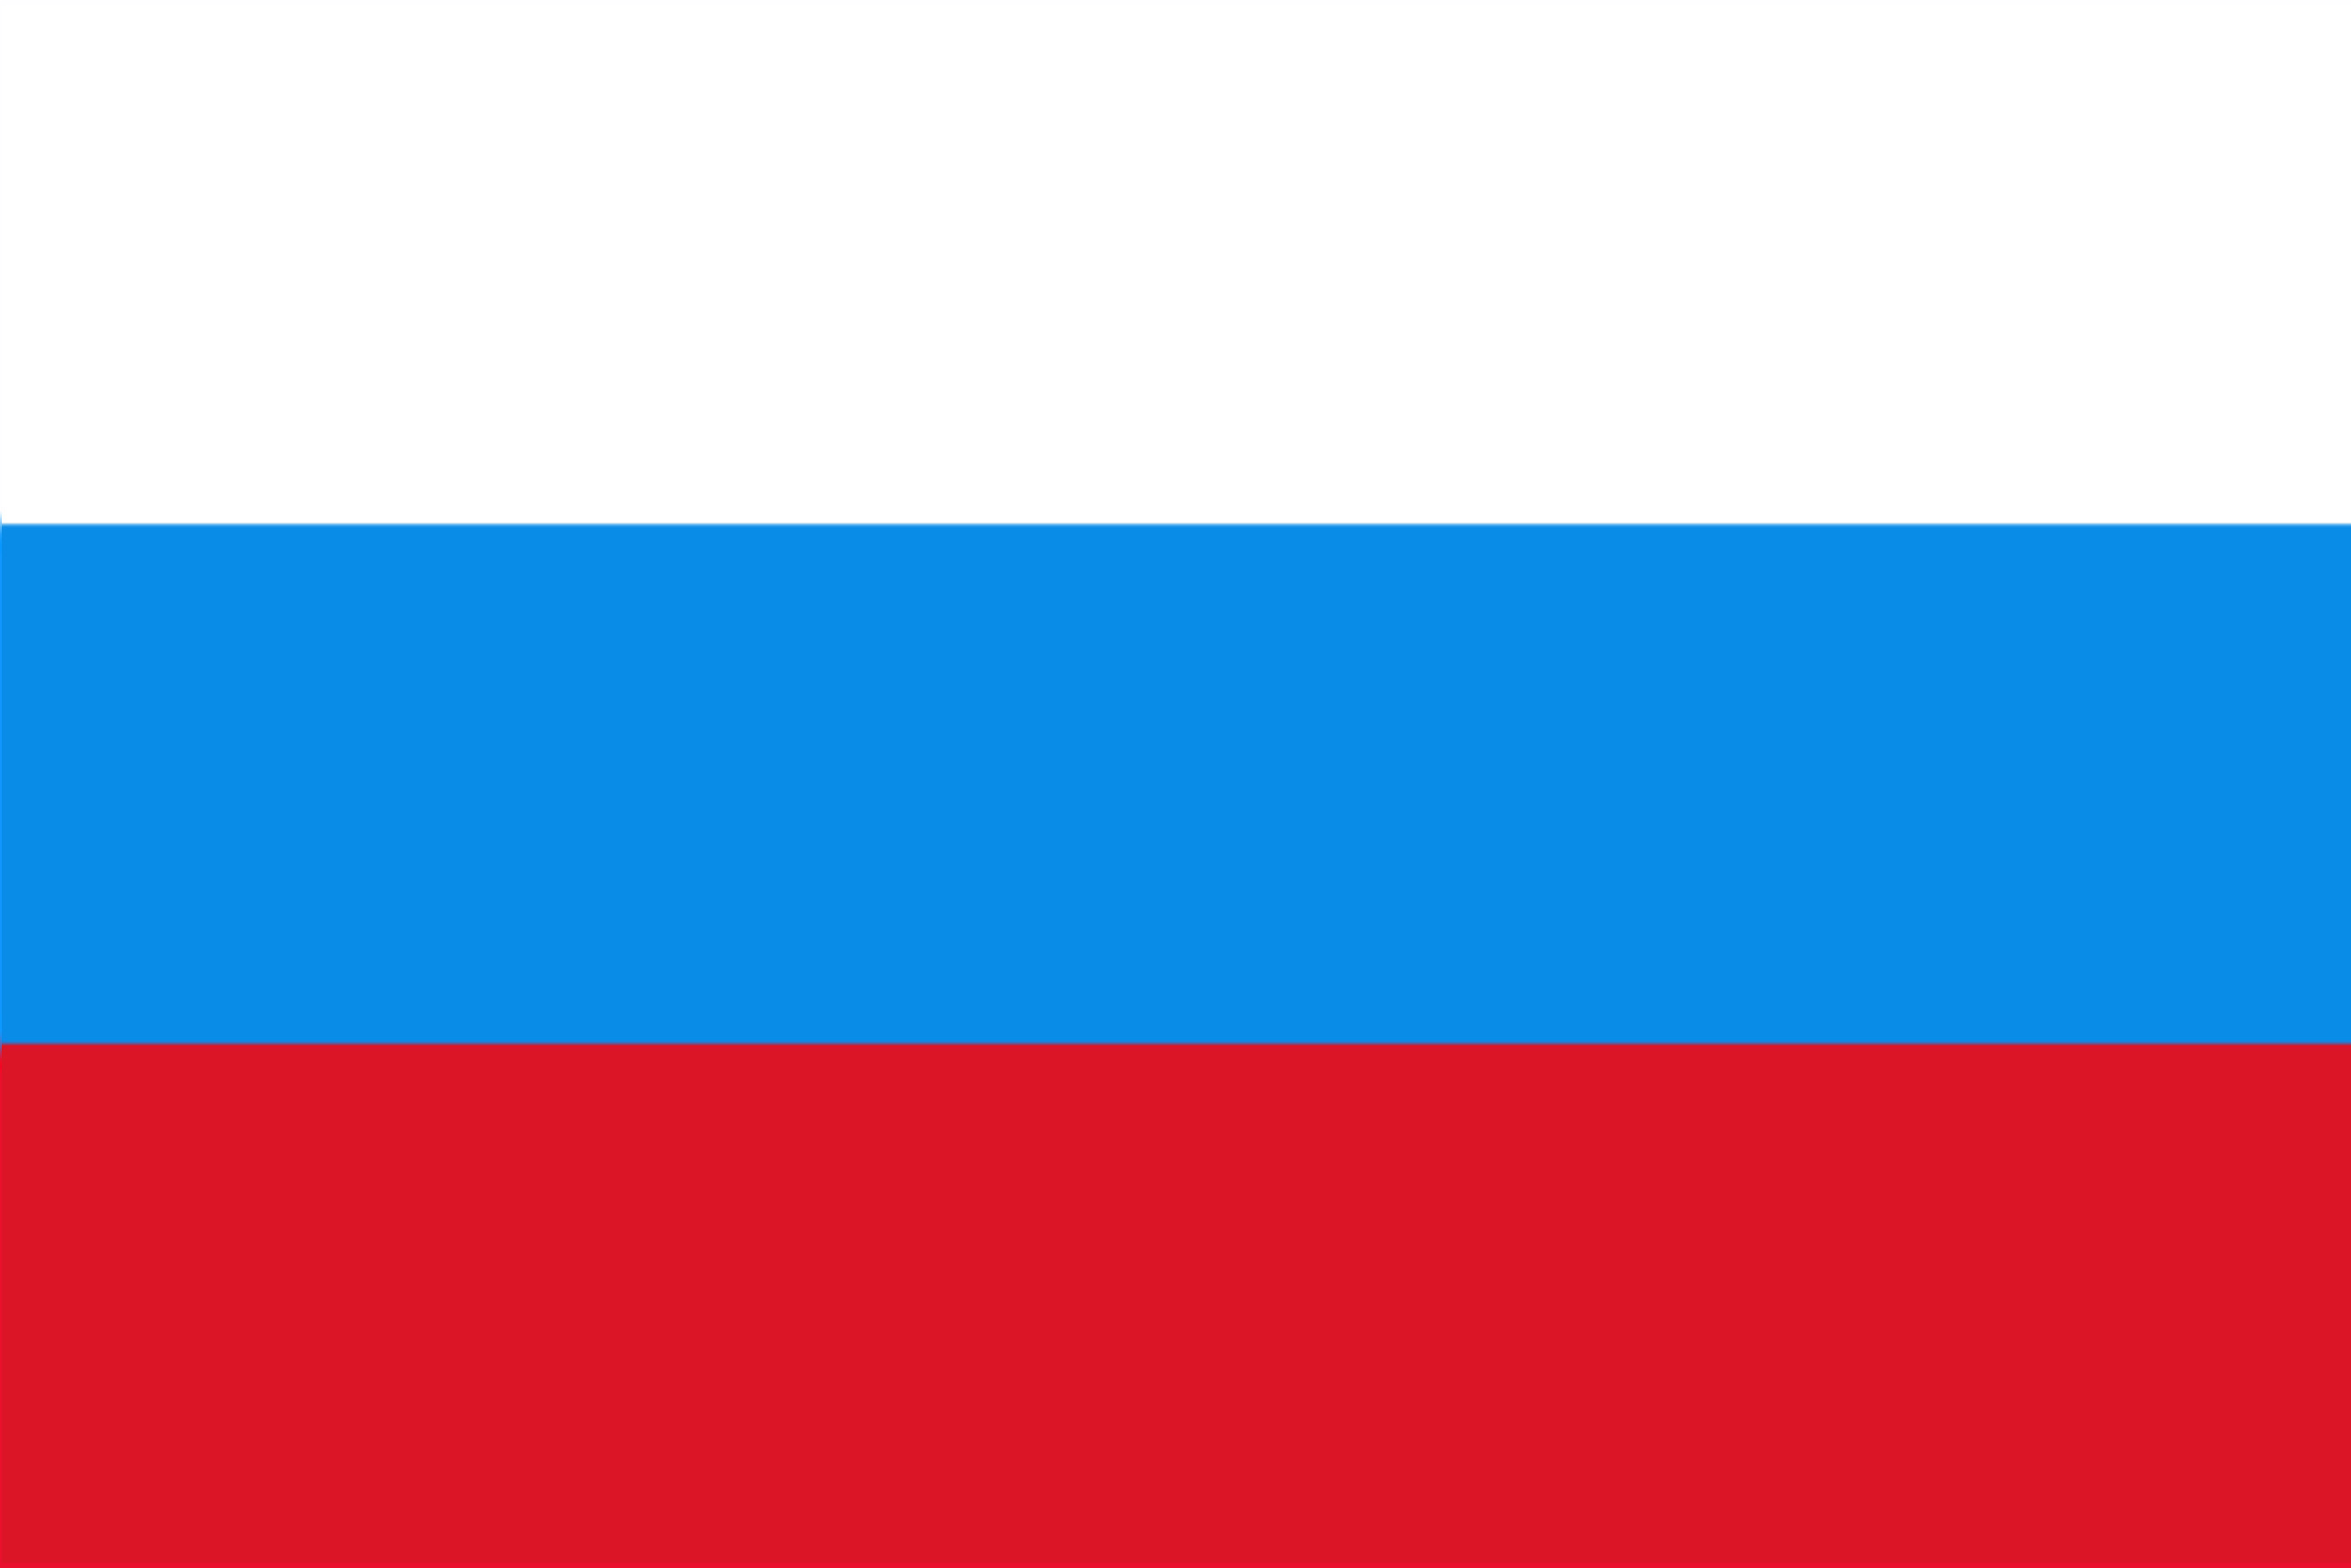 Flag map of the Russian federation 2008-2014 by CTGonYT on DeviantArt